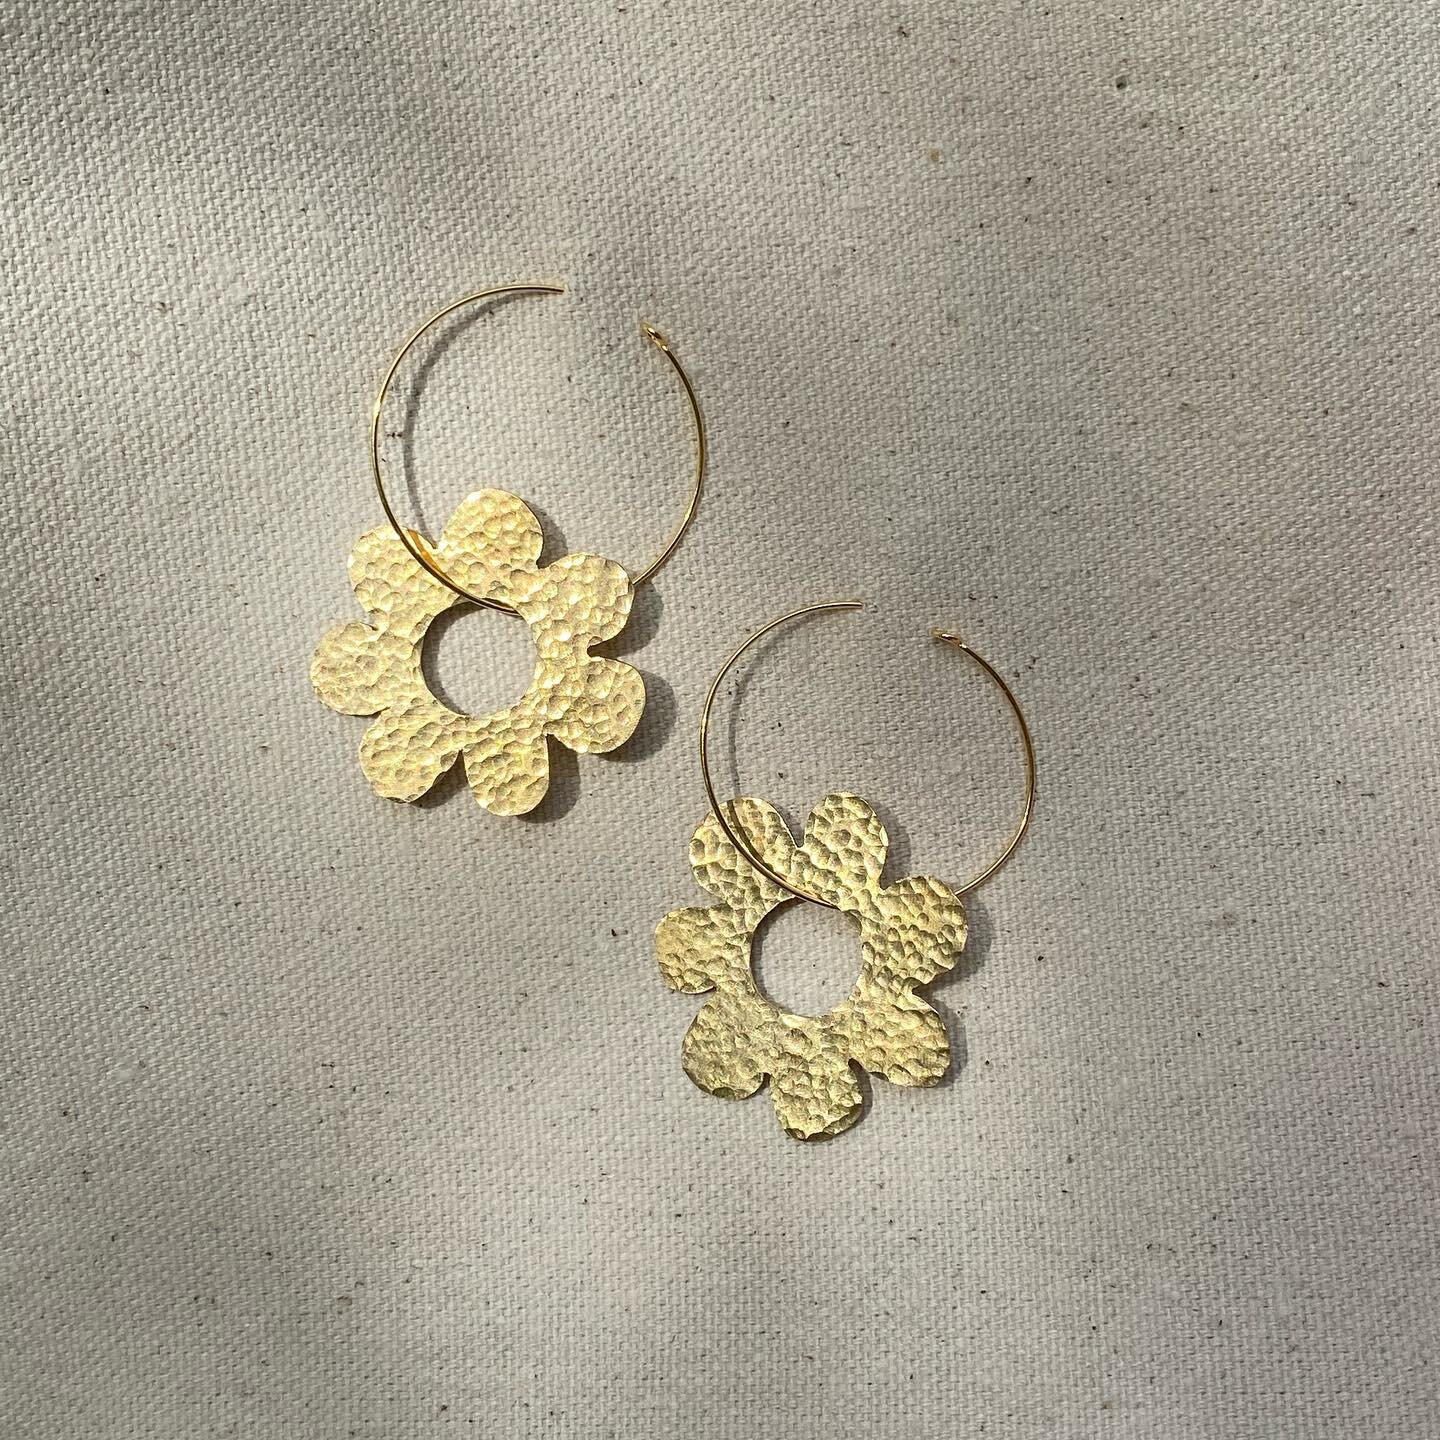 🪷Lotus Hoops handmade with love, hammered brass and gold-plated hoops